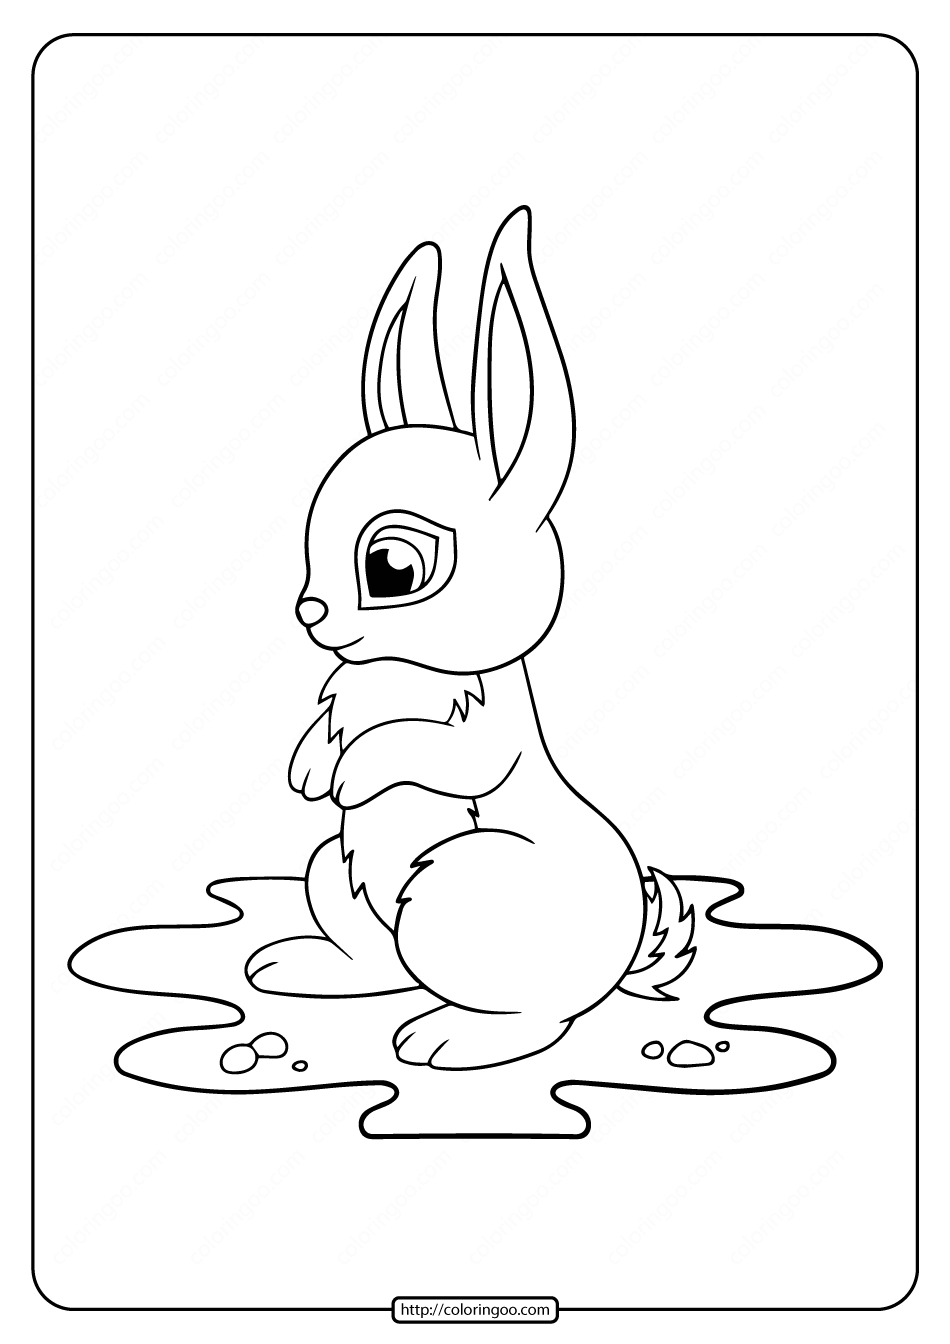 Free Printable Cute Rabbit Coloring Pages